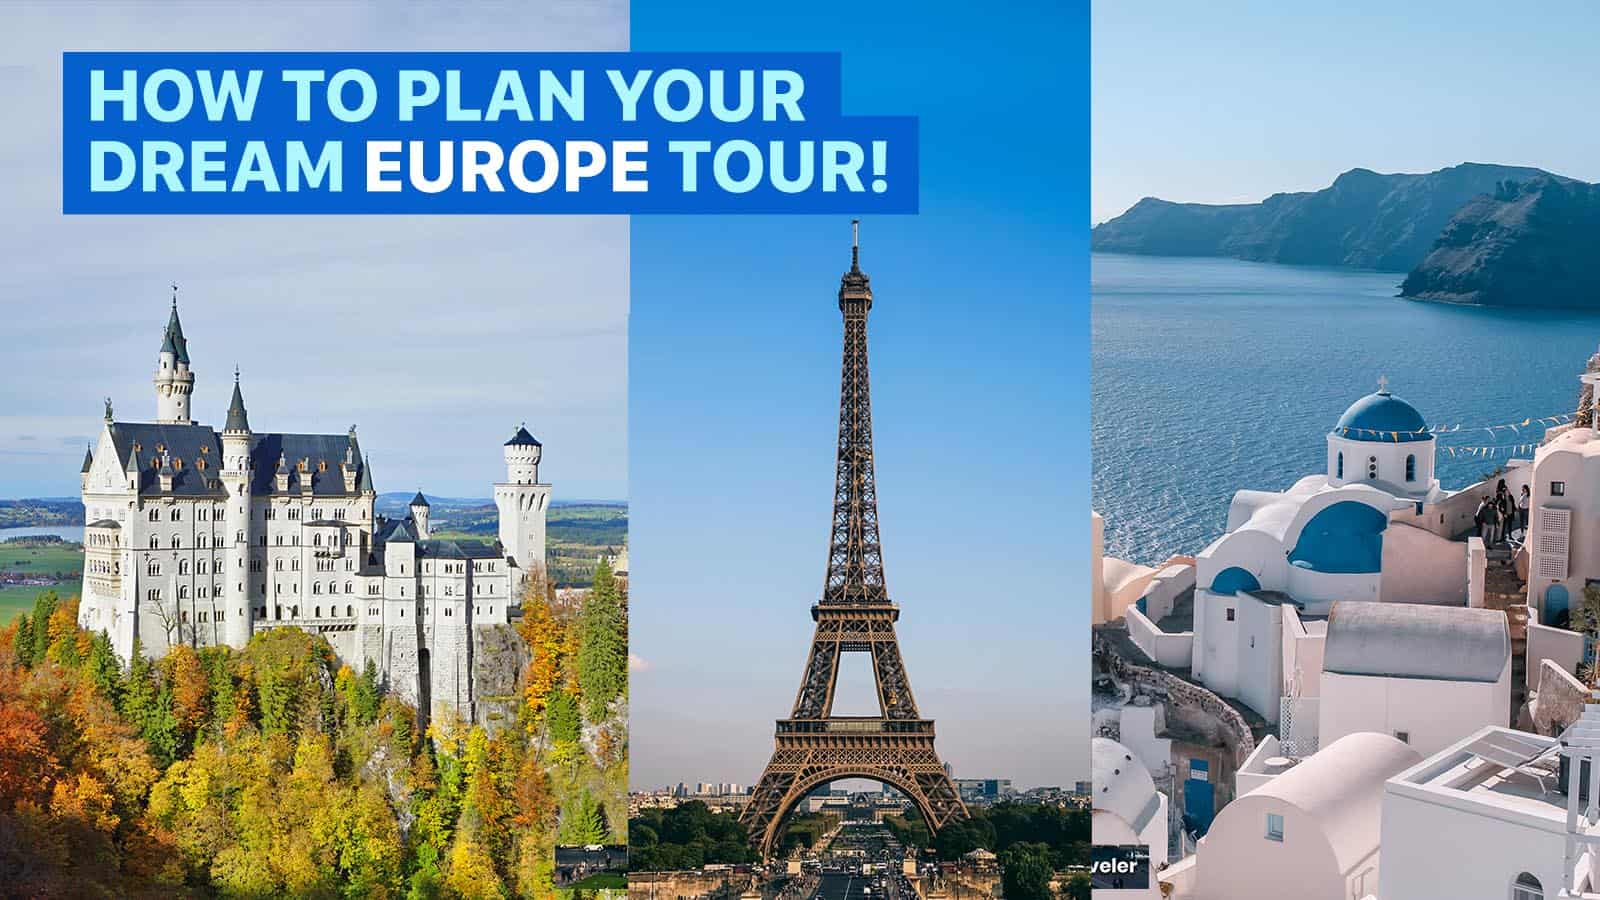 BACKPACKING EUROPE: How to Plan Your Dream Euro Tour on a Budget